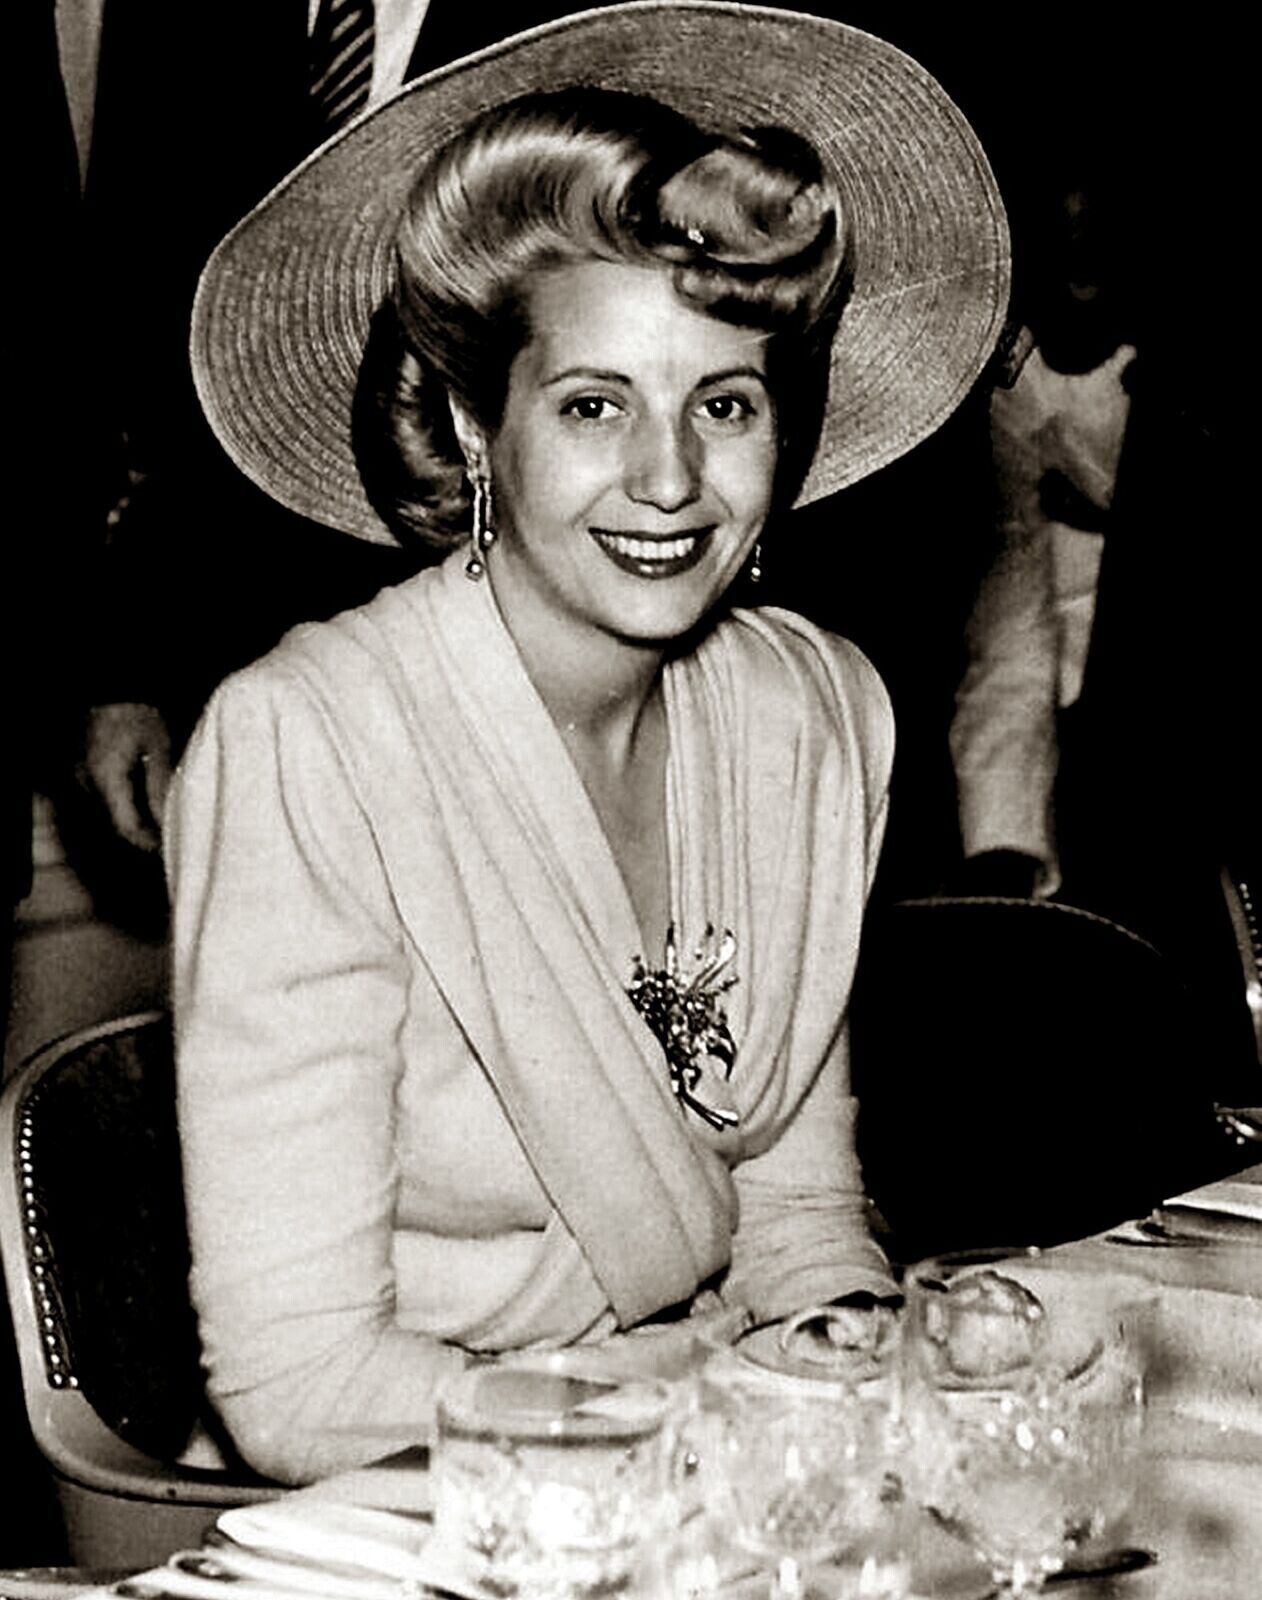 1947 EVA PERON in a hat Candid Picture Photo 8x10